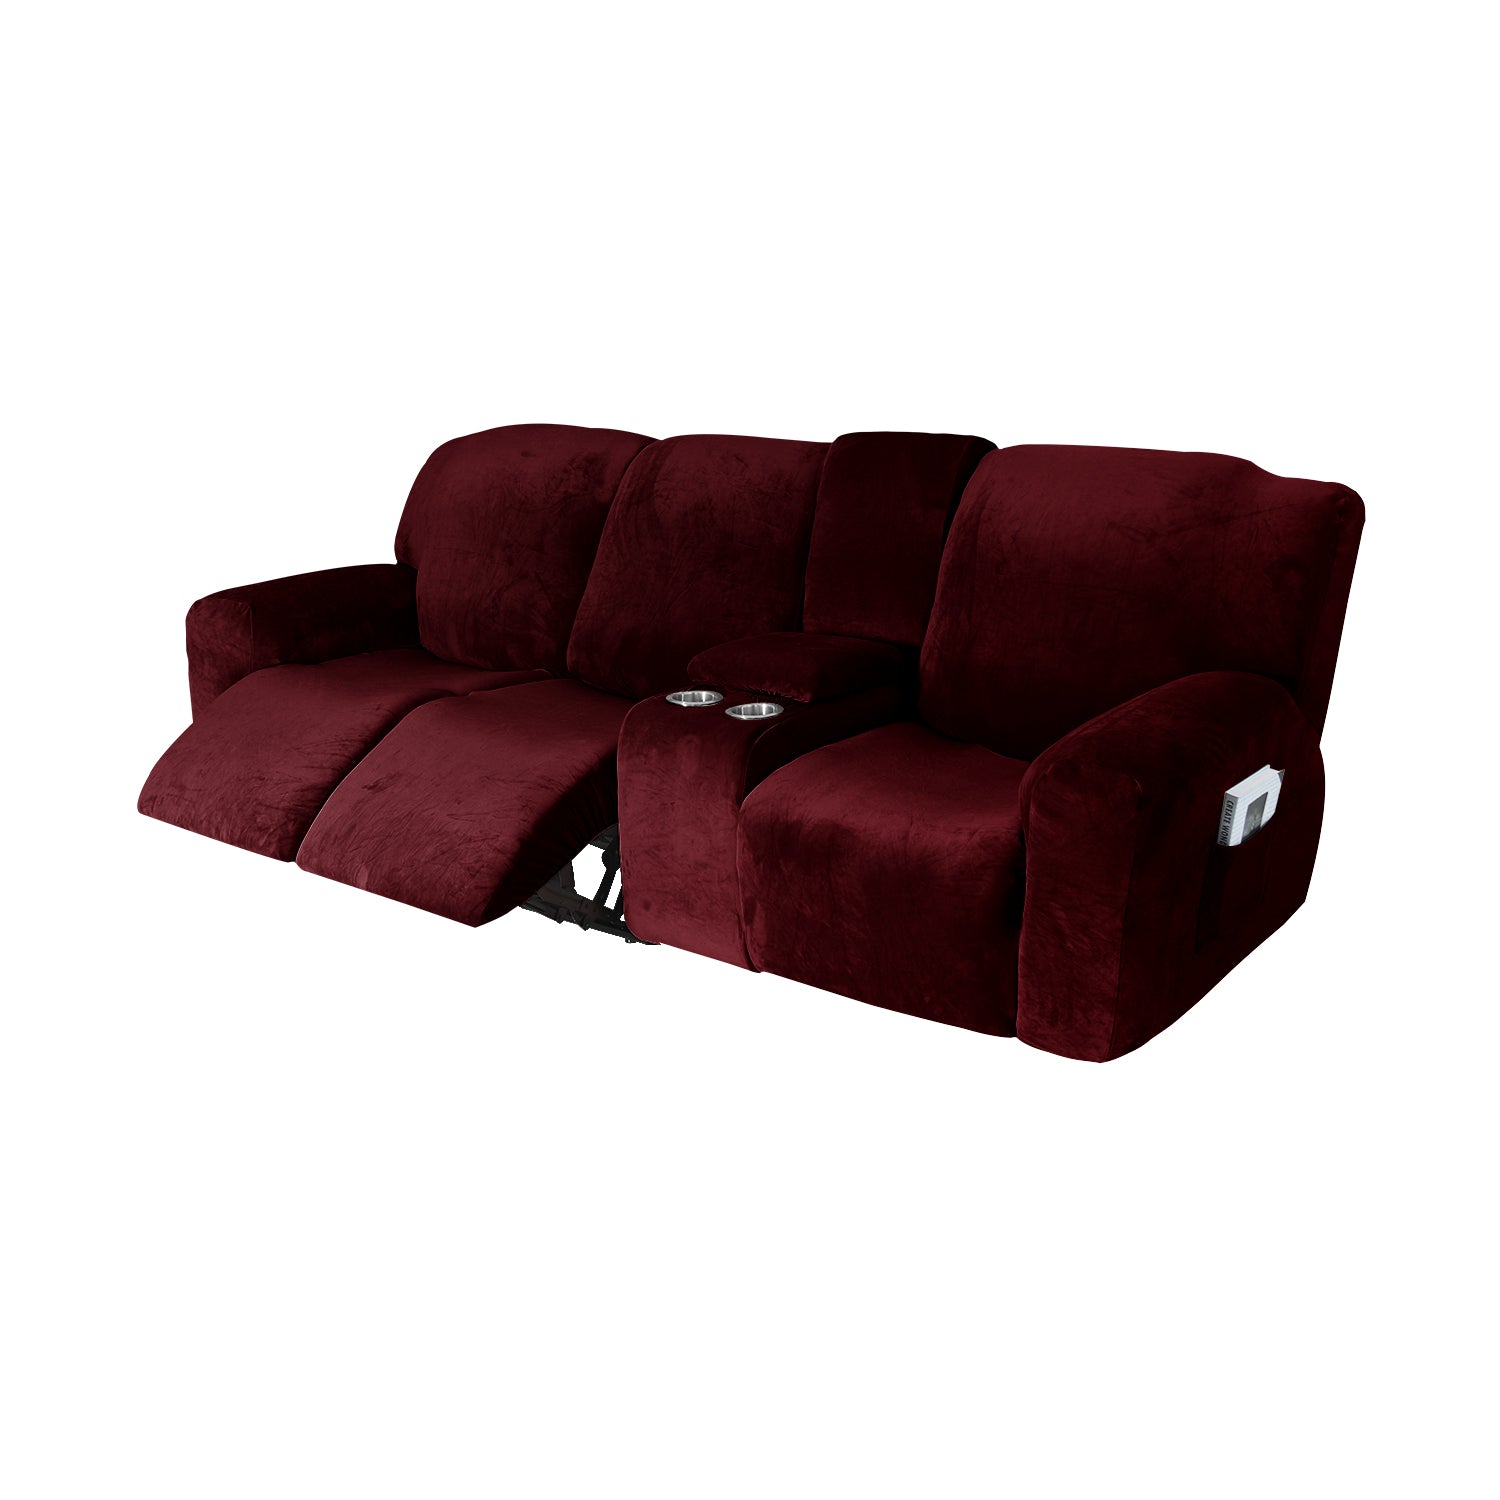 3 Seats-Recliner Cover-with Cup Holders-Velvet-Red